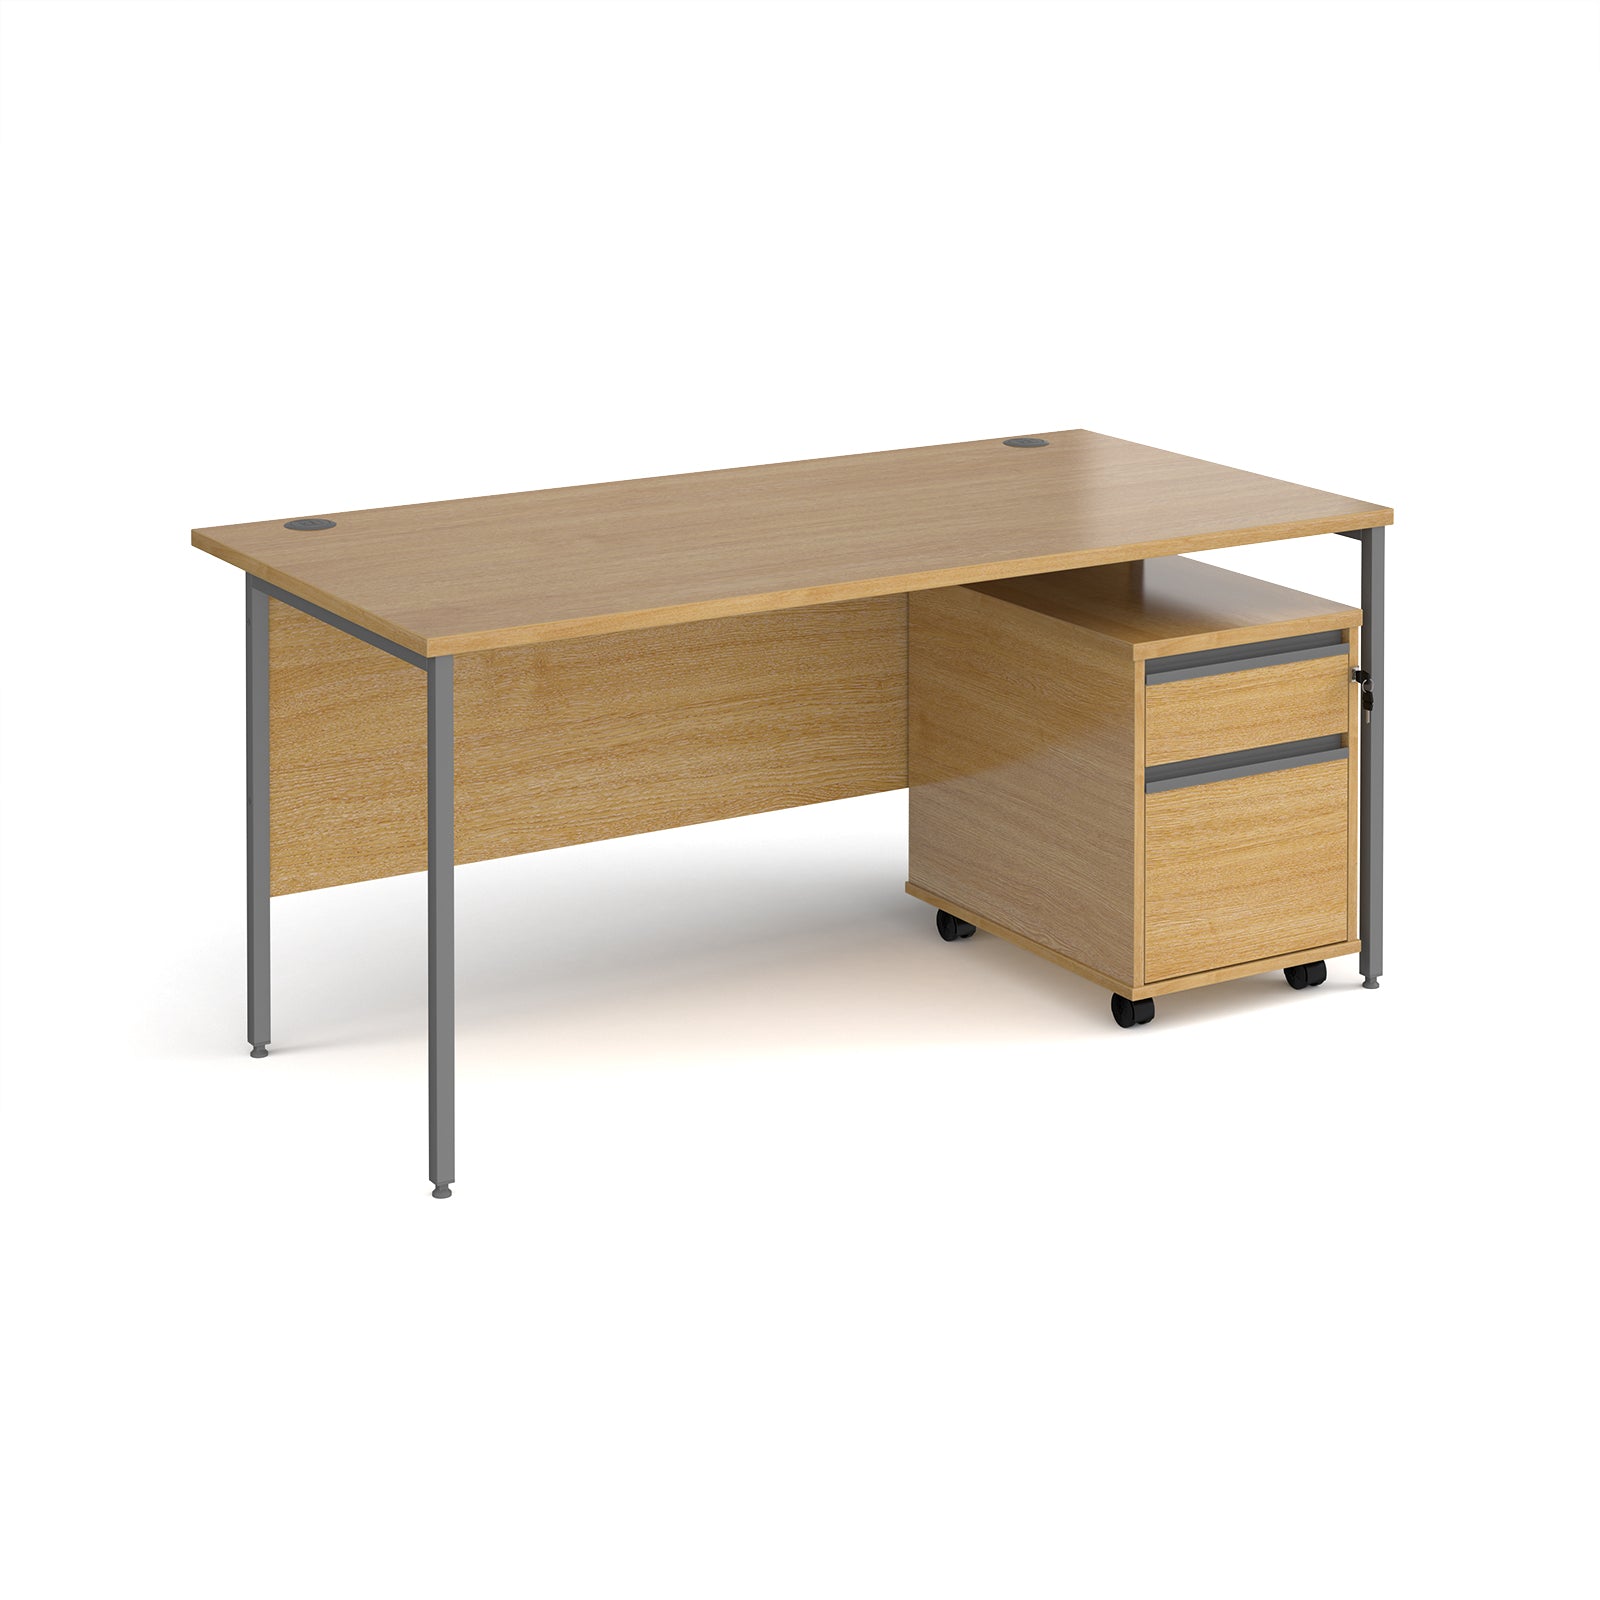 Contract 25 straight H-frame desk with mobile pedestal